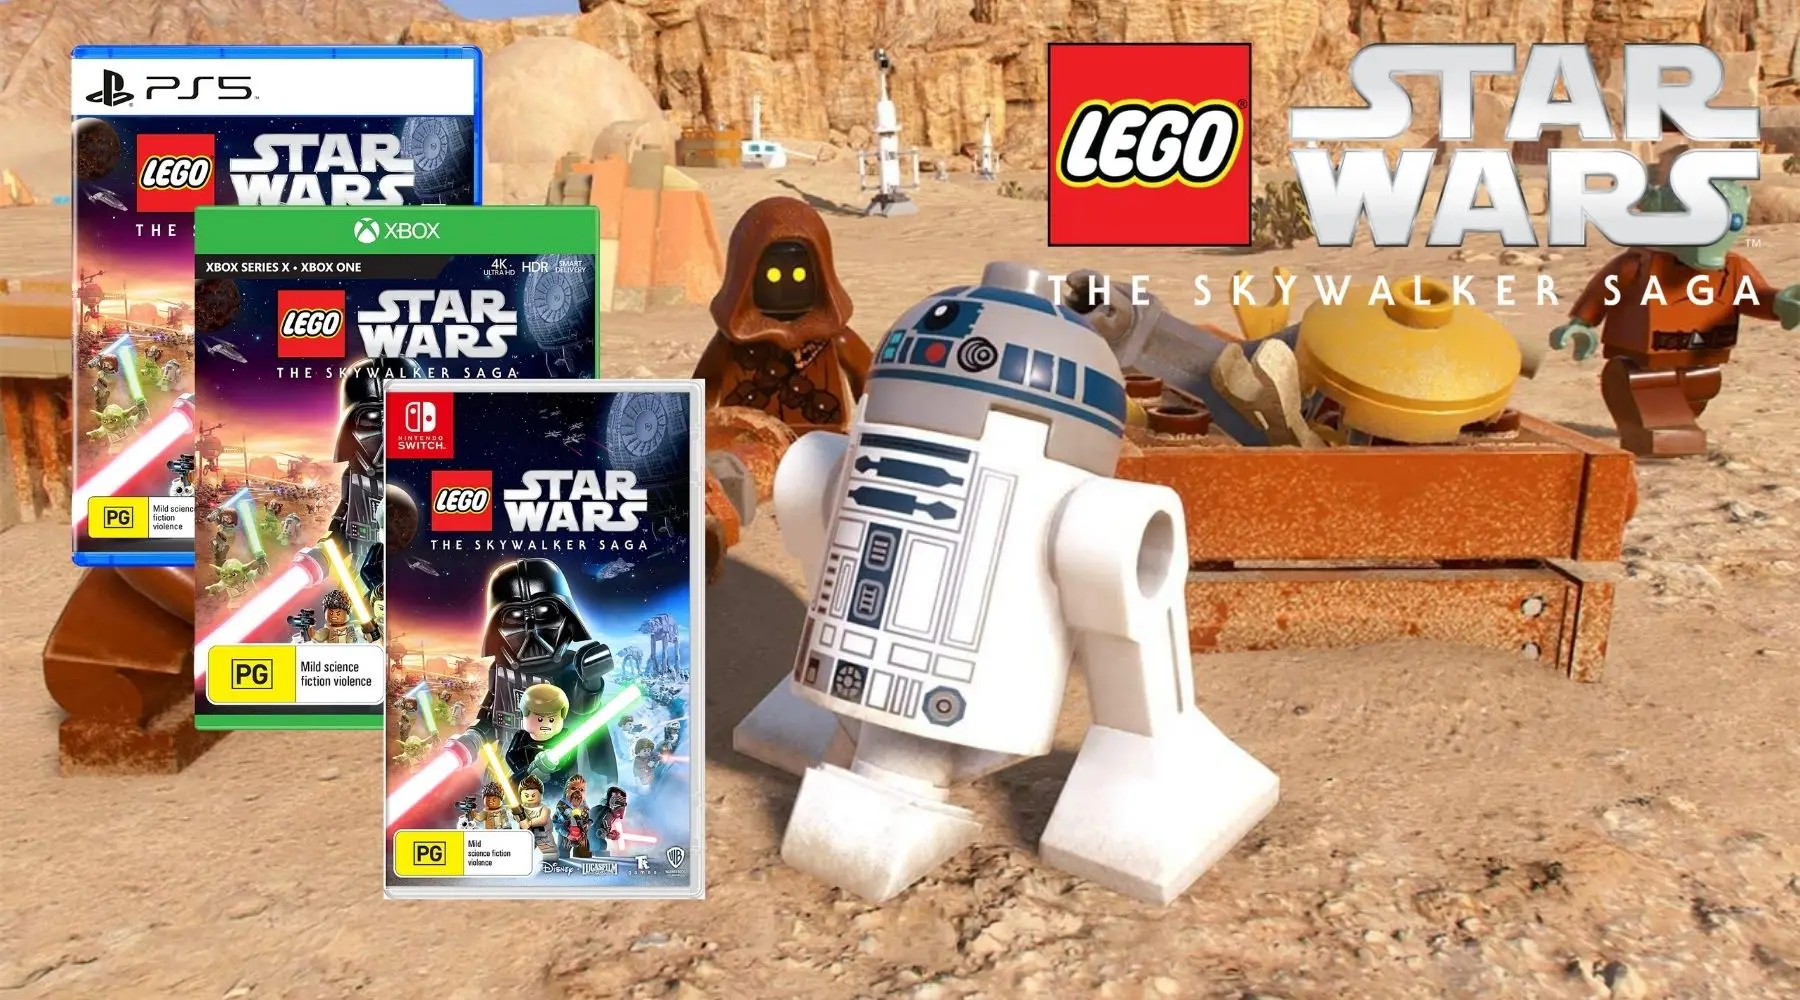 Cheapest copies of Lego Star Wars The Skywalker Saga: Save $25